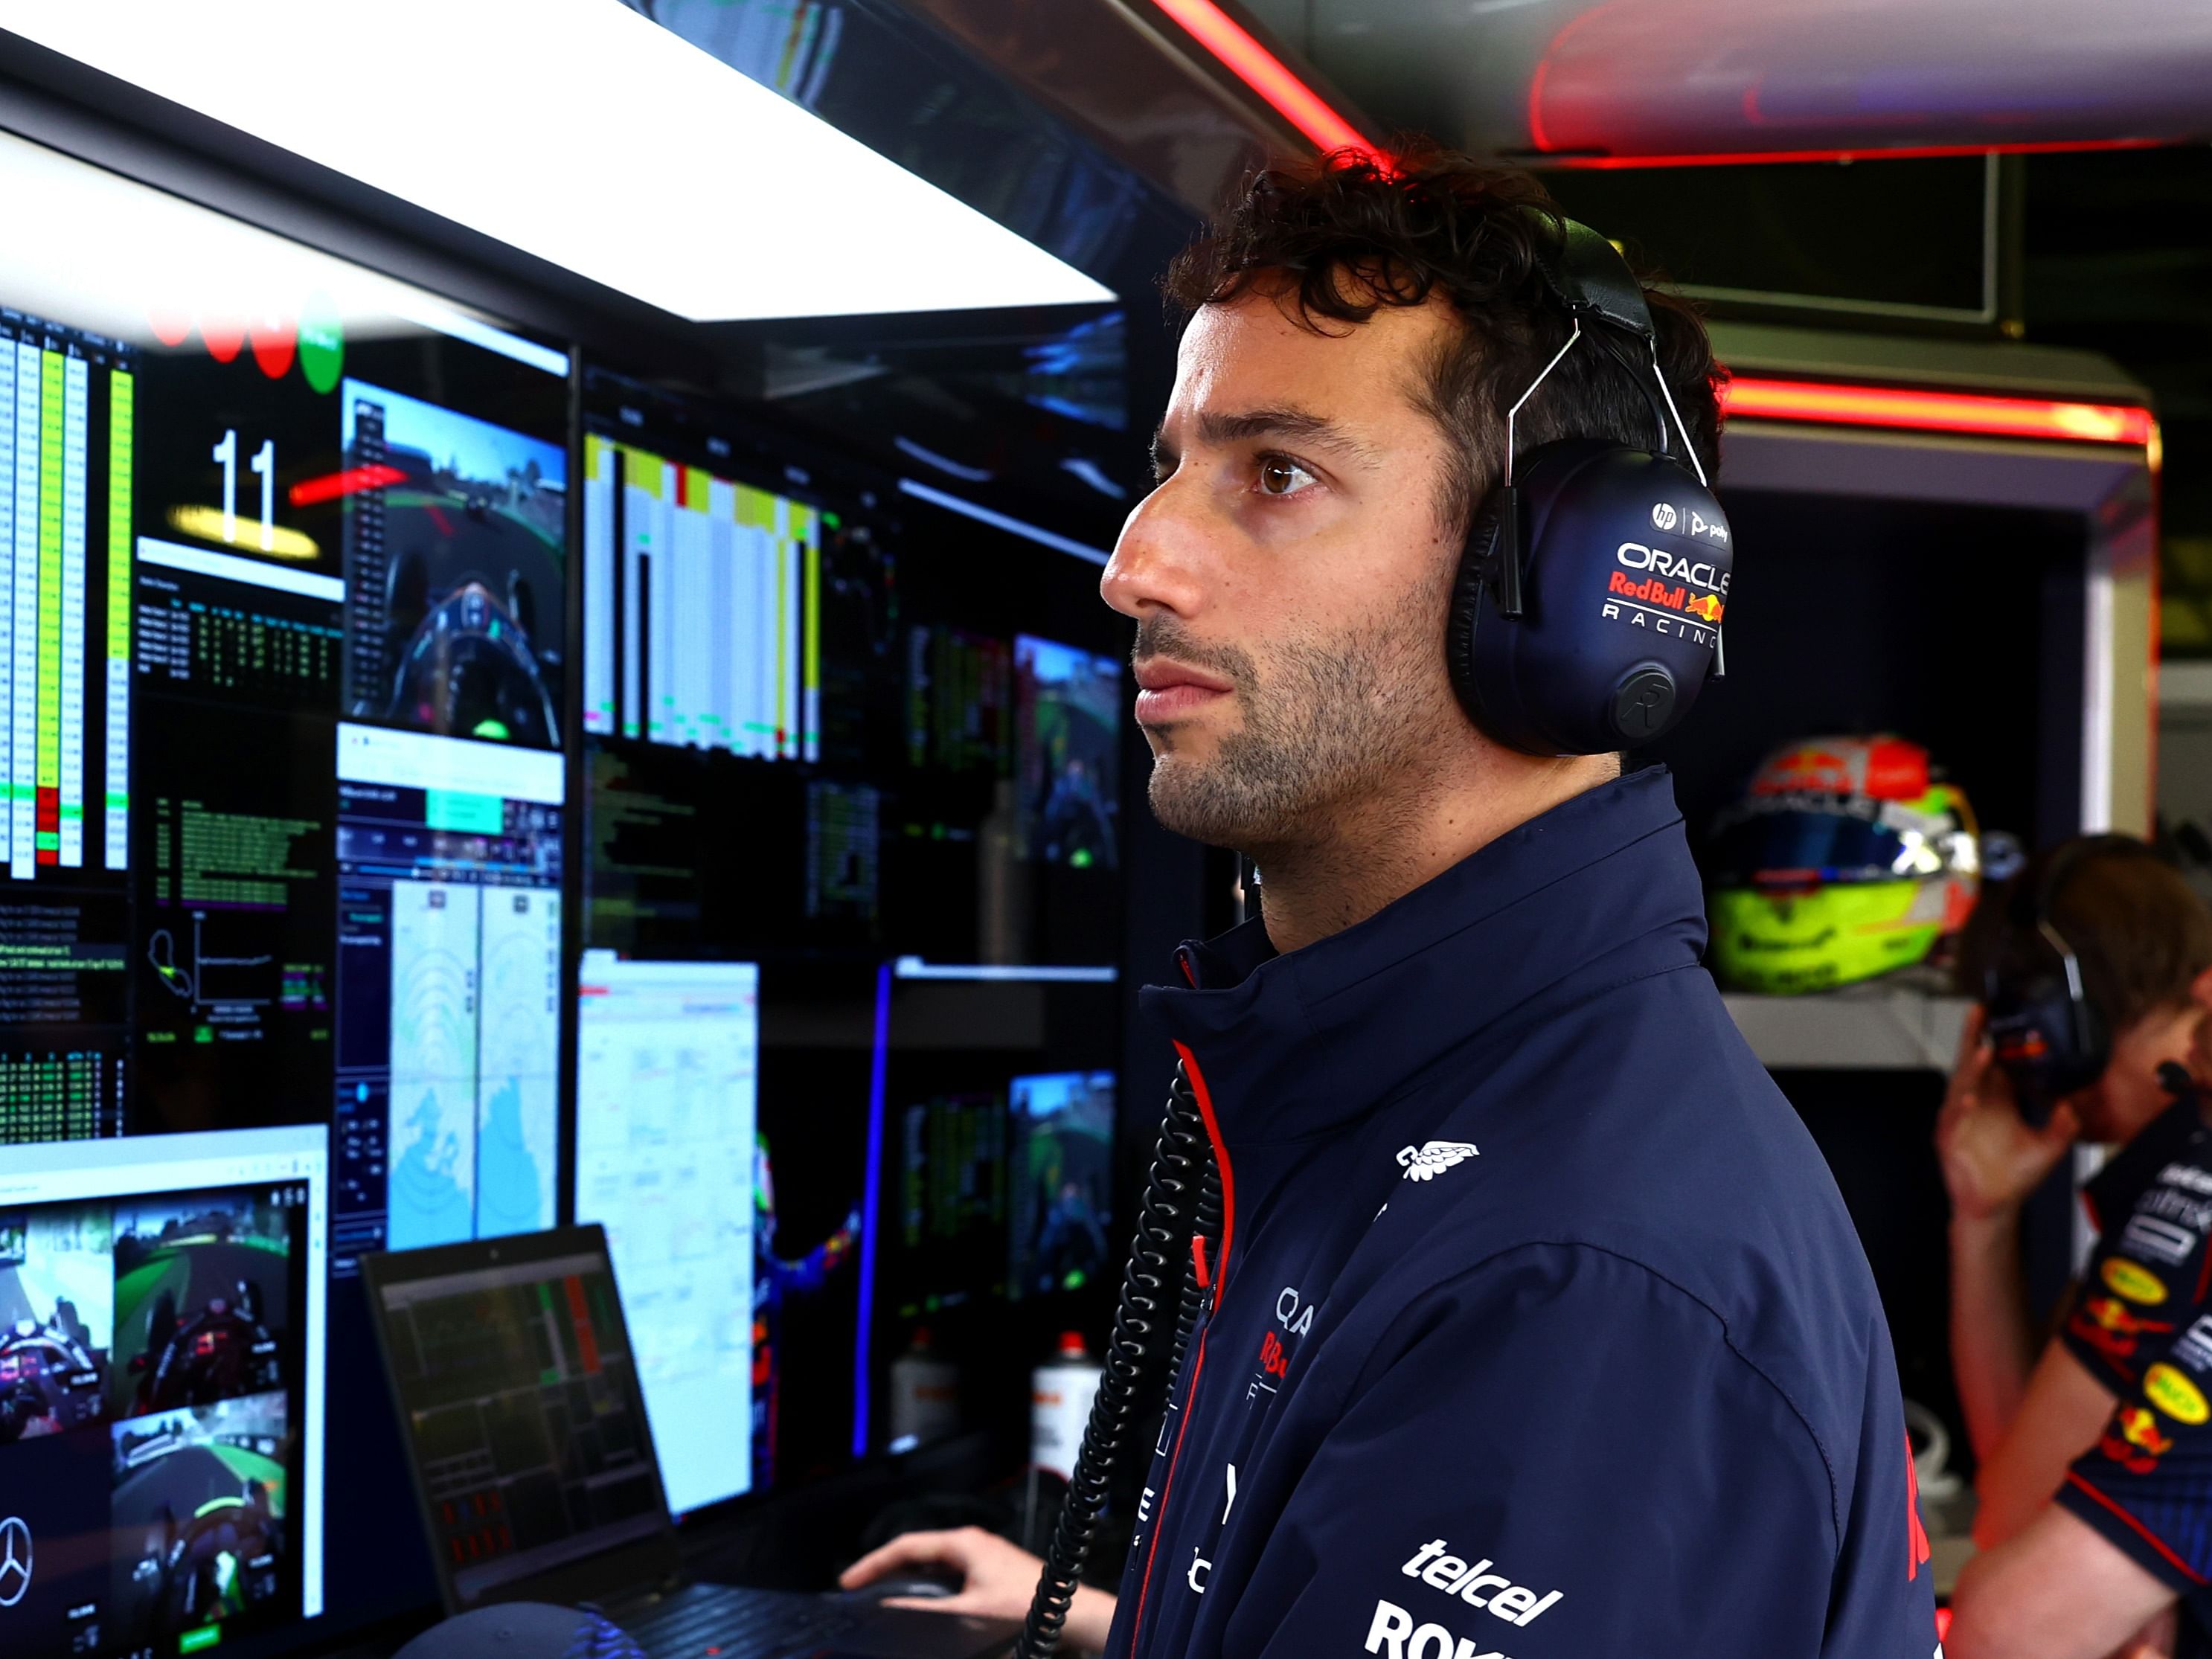 Daniel Ricciardo watches the action in the Red Bull Racing garage during the 2023 F1 Australian Grand Prix. (Photo by Mark Thompson/Getty Images)